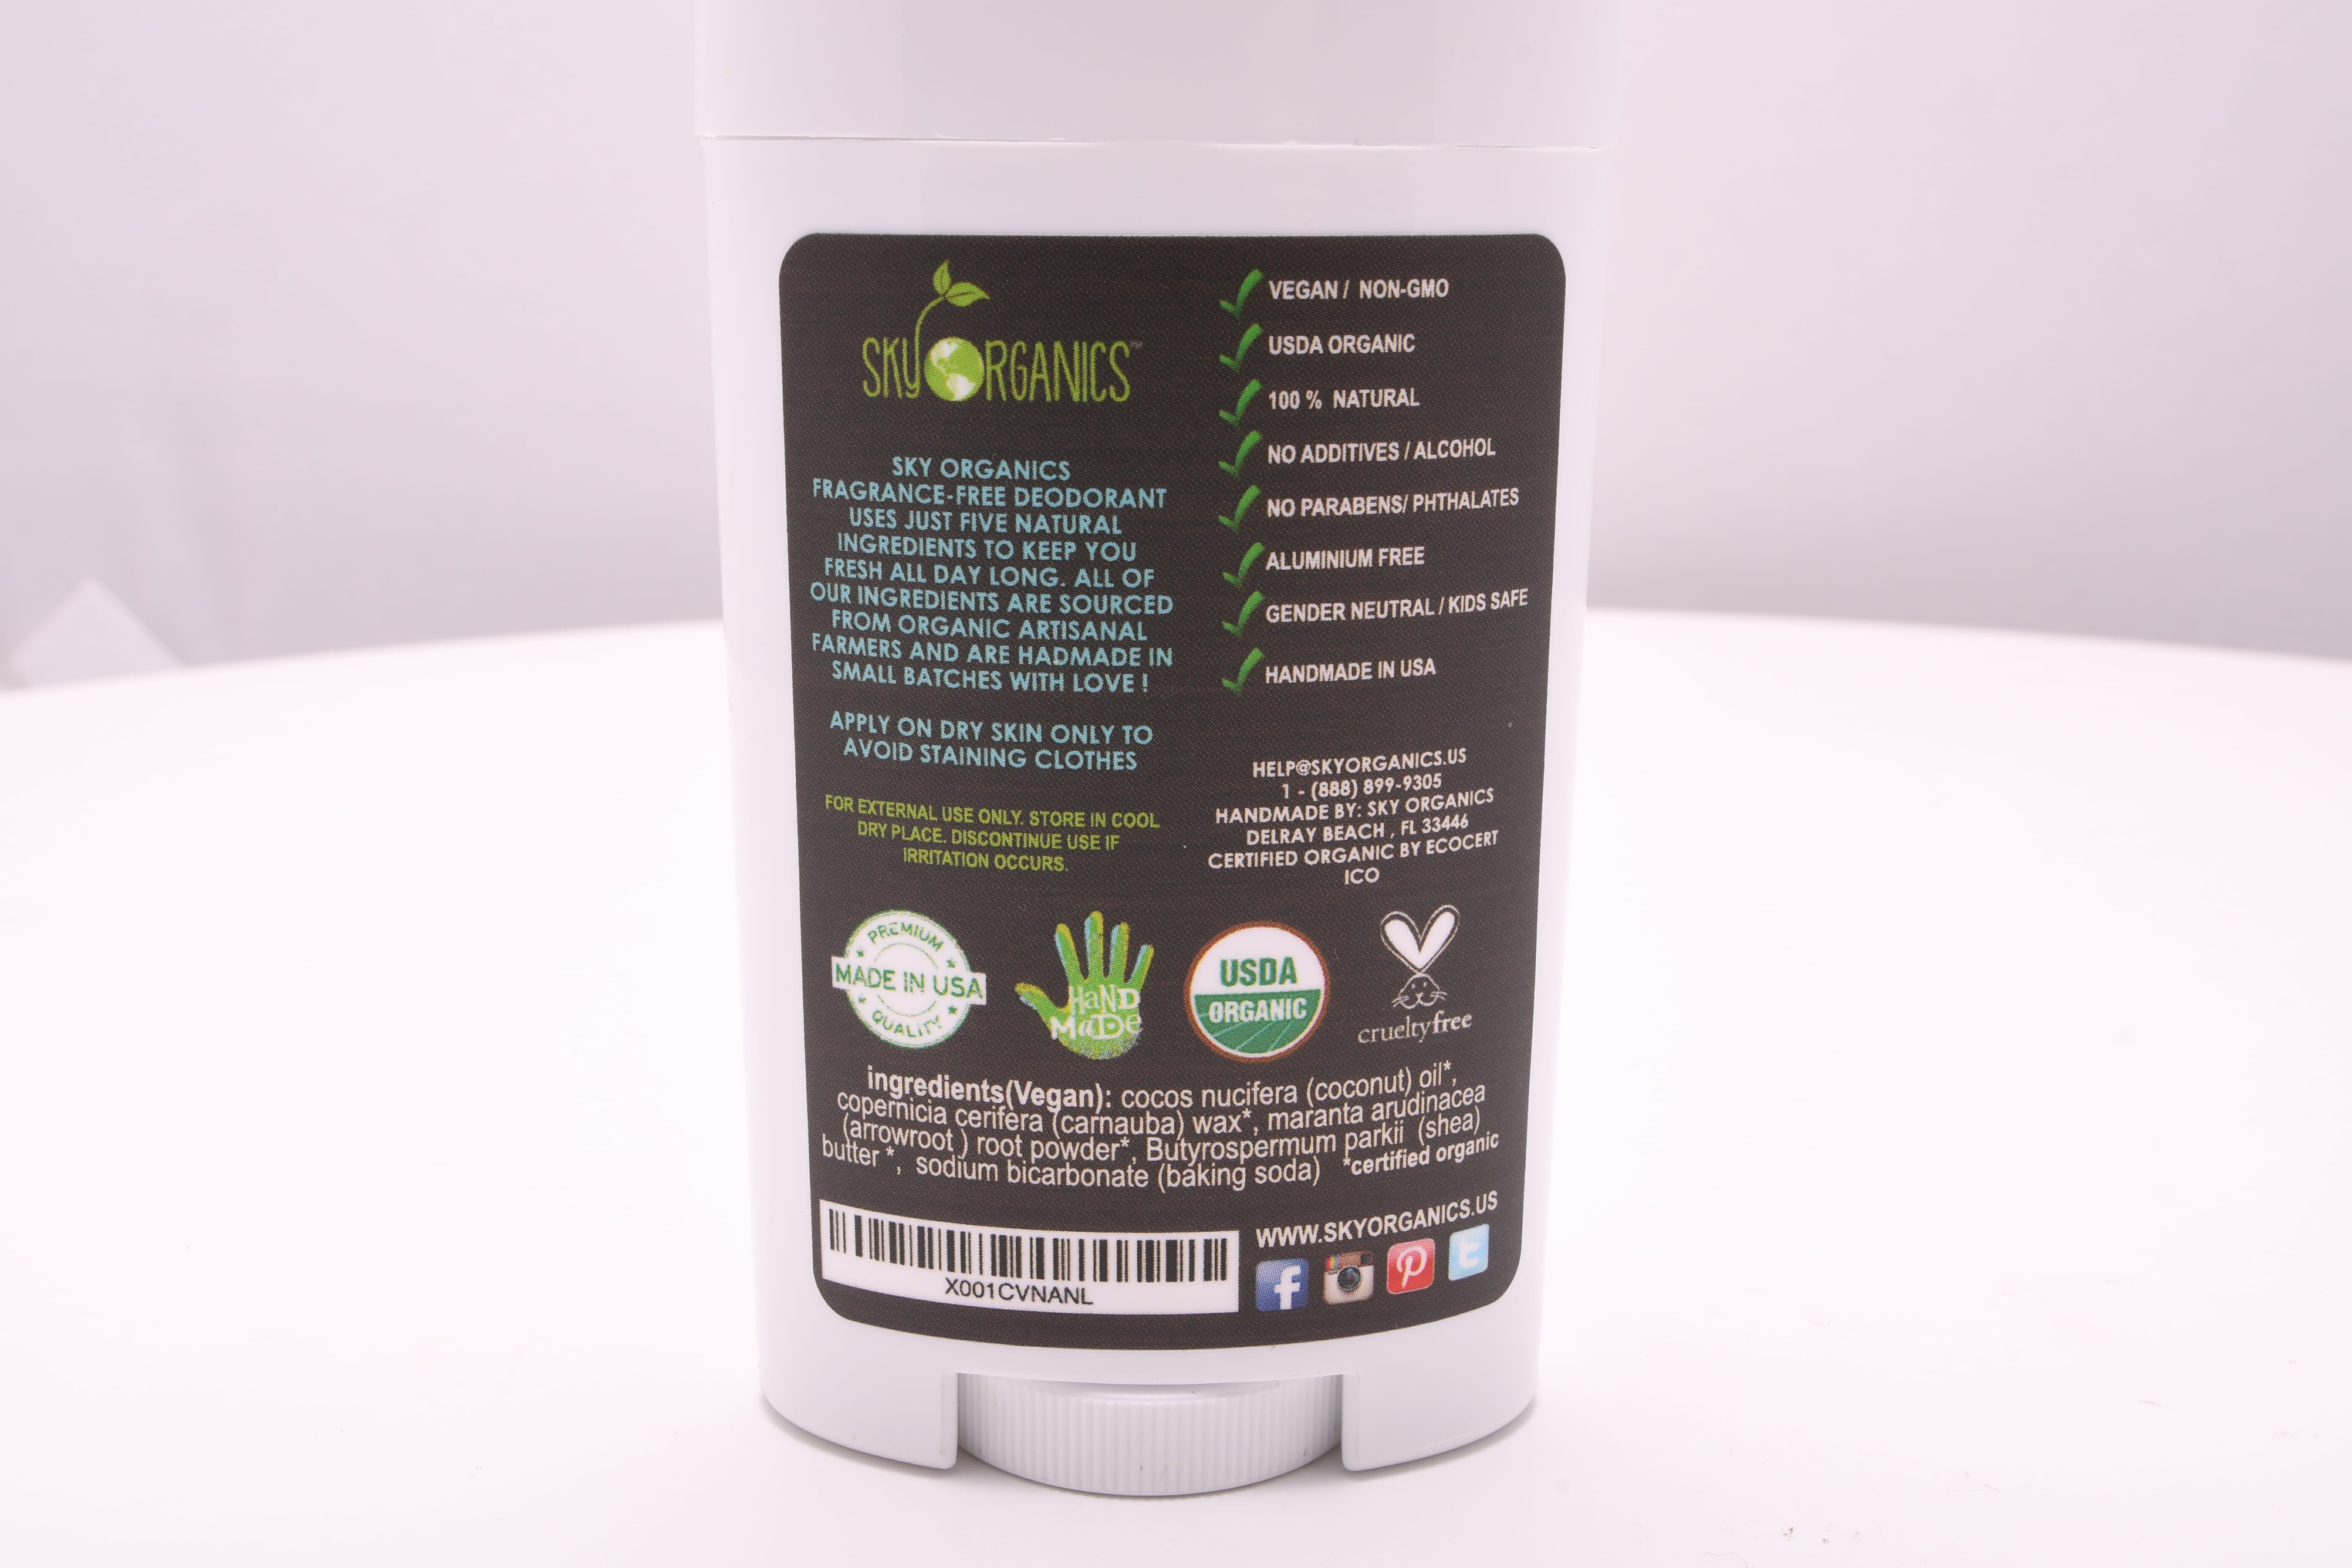 The backside of the vegan-organic deodorant, listing its ingredients and processes.